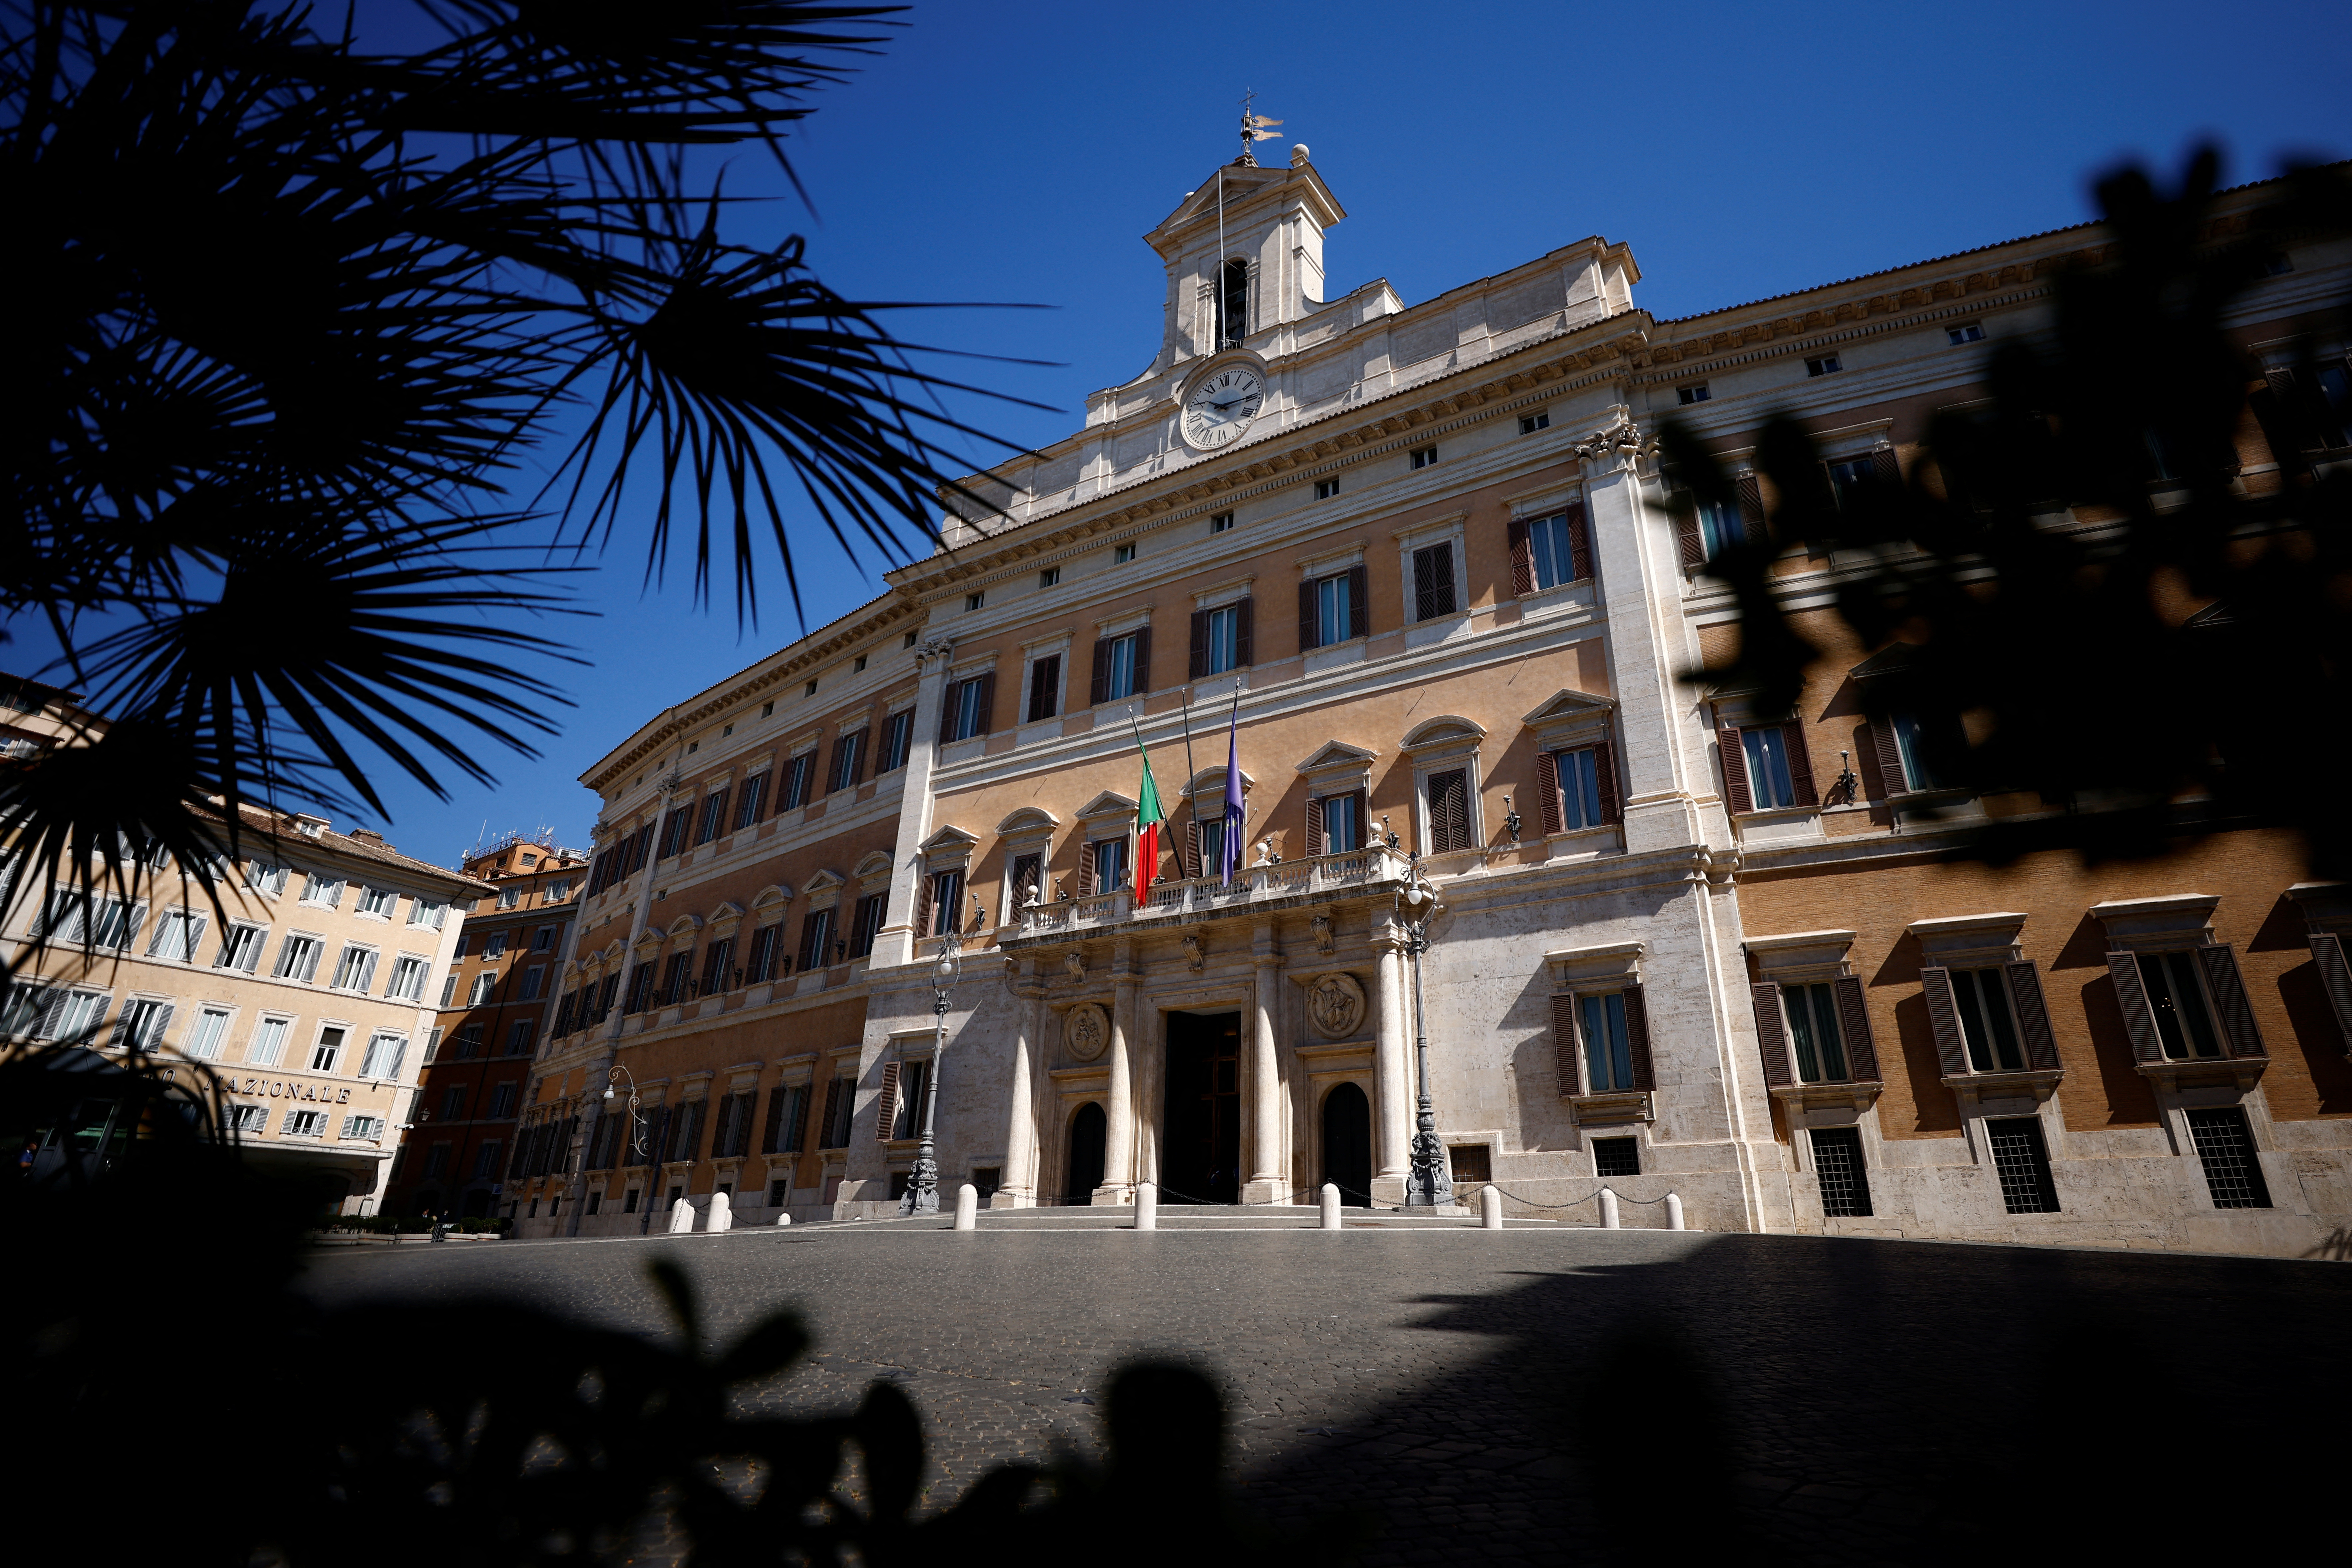 A view of Montecitorio Palace in Rome